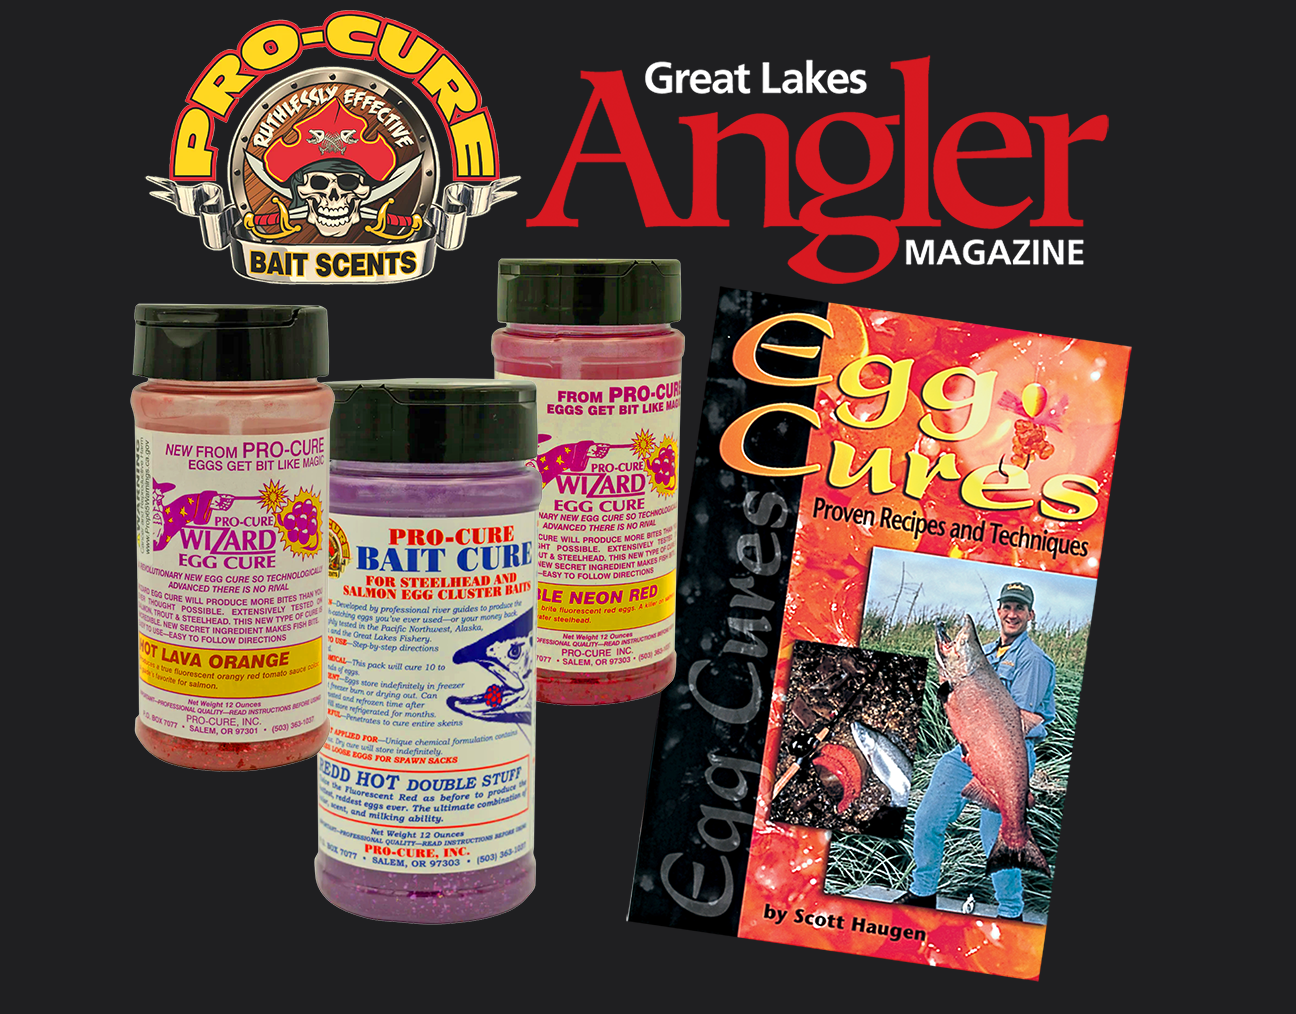 Pro-Cure Egg Cure + Egg Cures + Great Lakes Angler magazine 1 year digital